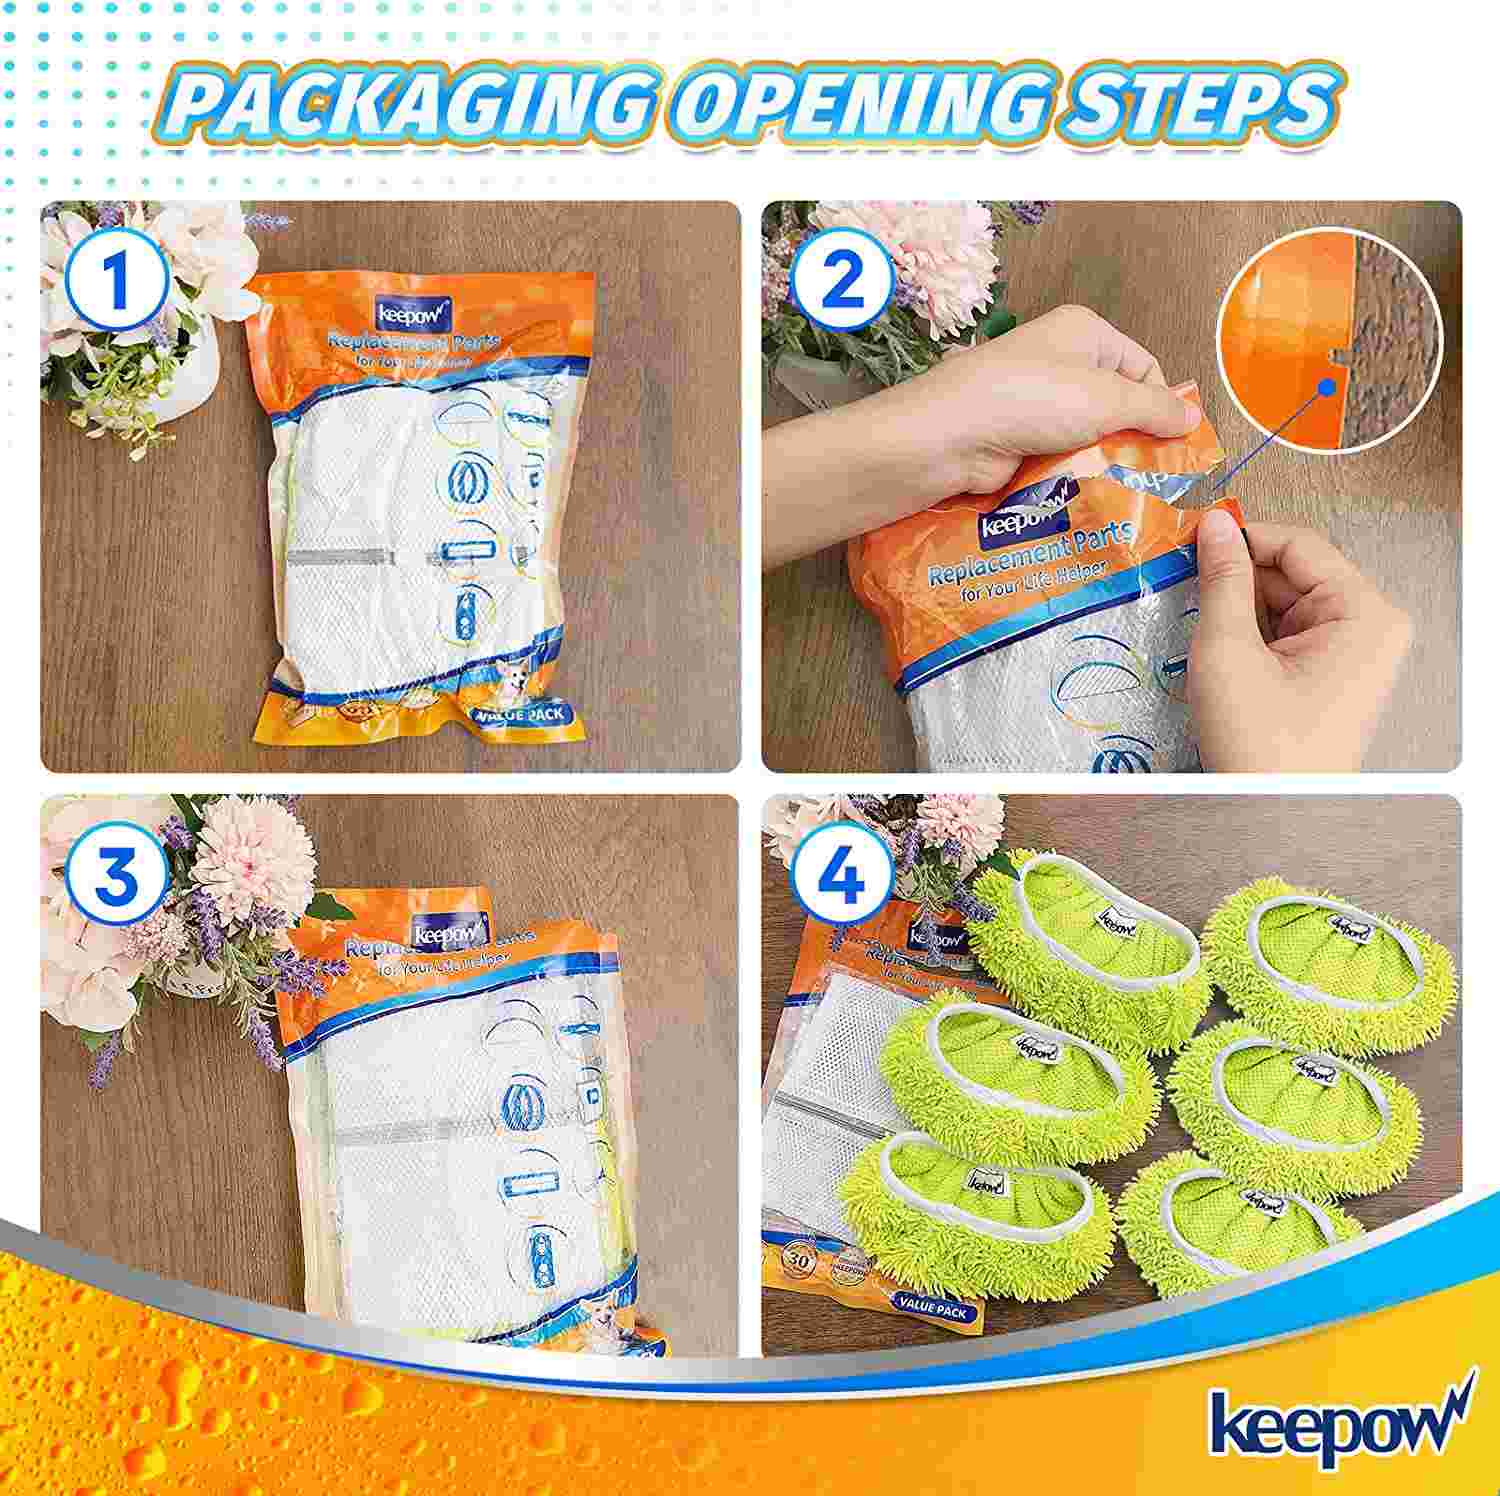 KEEPOW Dry Sweeping/Wet Mopping Cloths for Hard-Surface/Hardwood Floor Cleaning